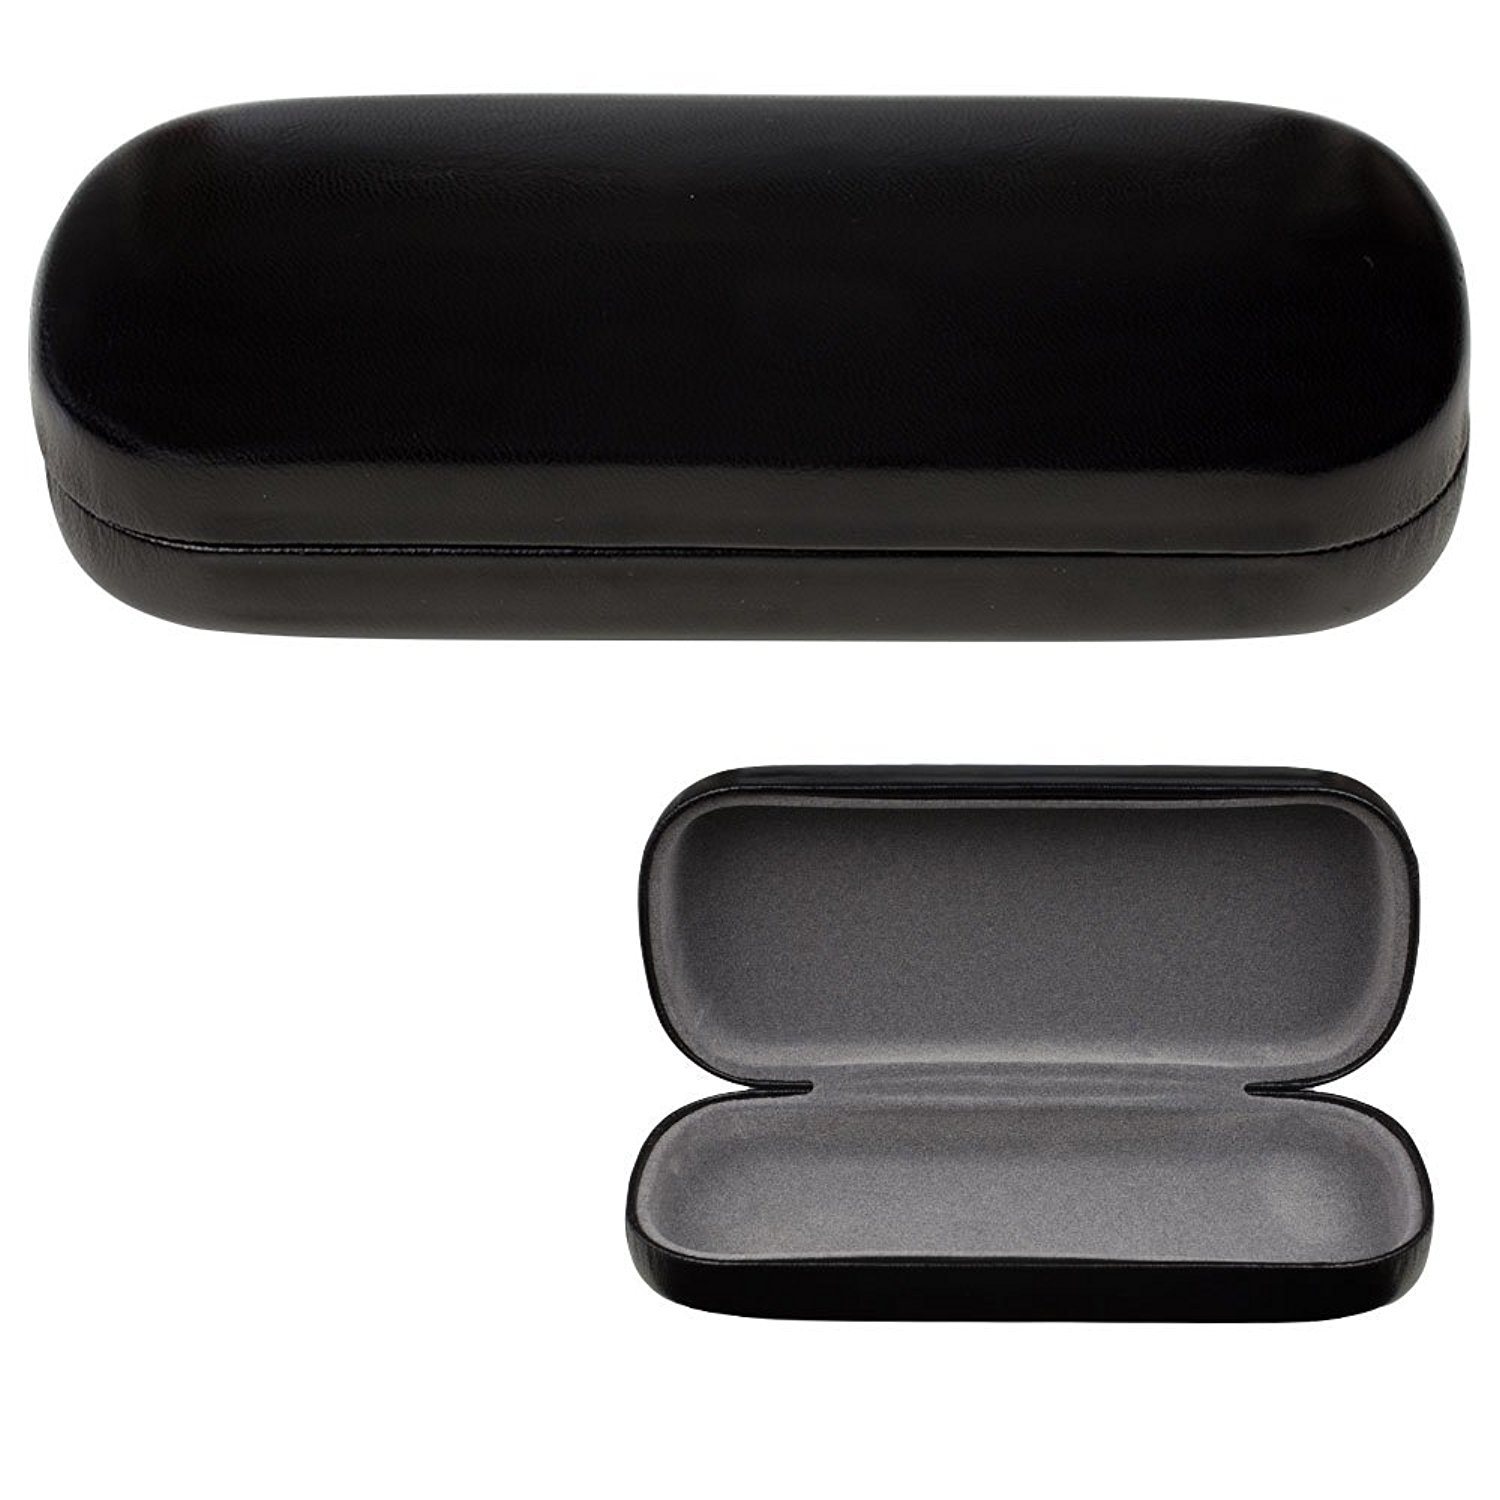 Glasses Case, Hard Shell Protects & Stores Sunglasses, Reading ...